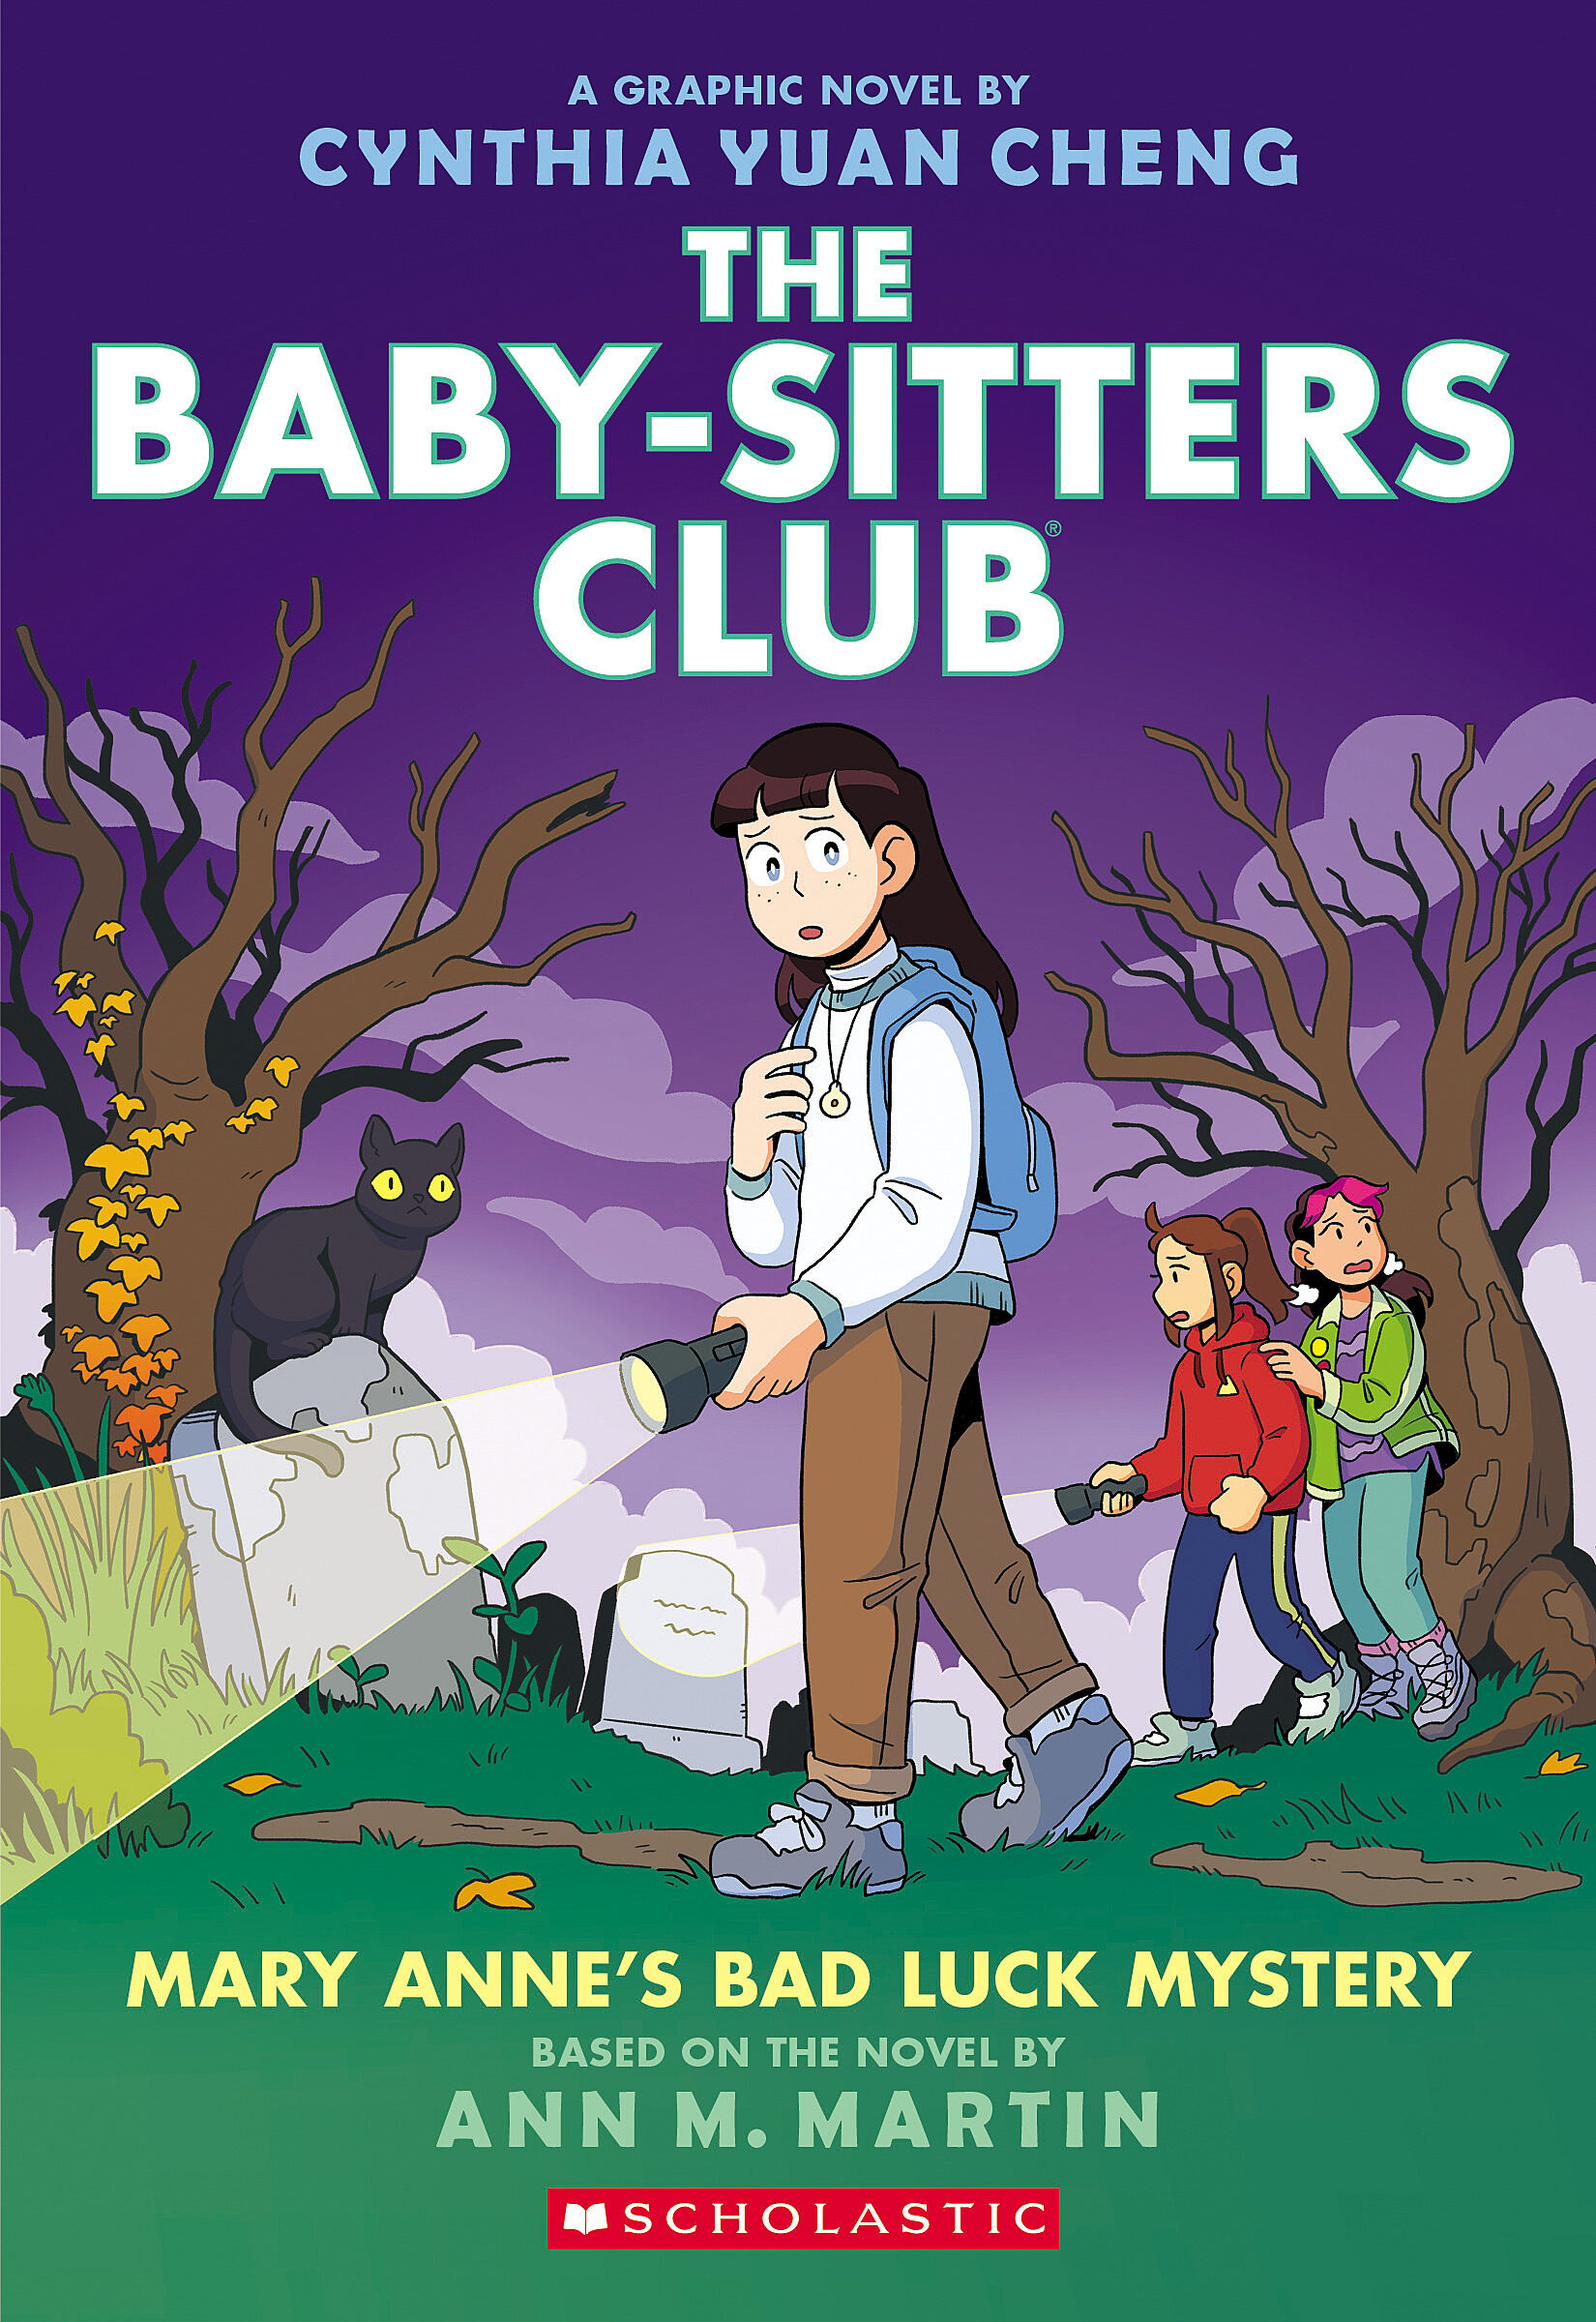 Mary Anne's Bad Luck Mystery: A Graphic Novel (The Baby-sitters Club #13) cover image